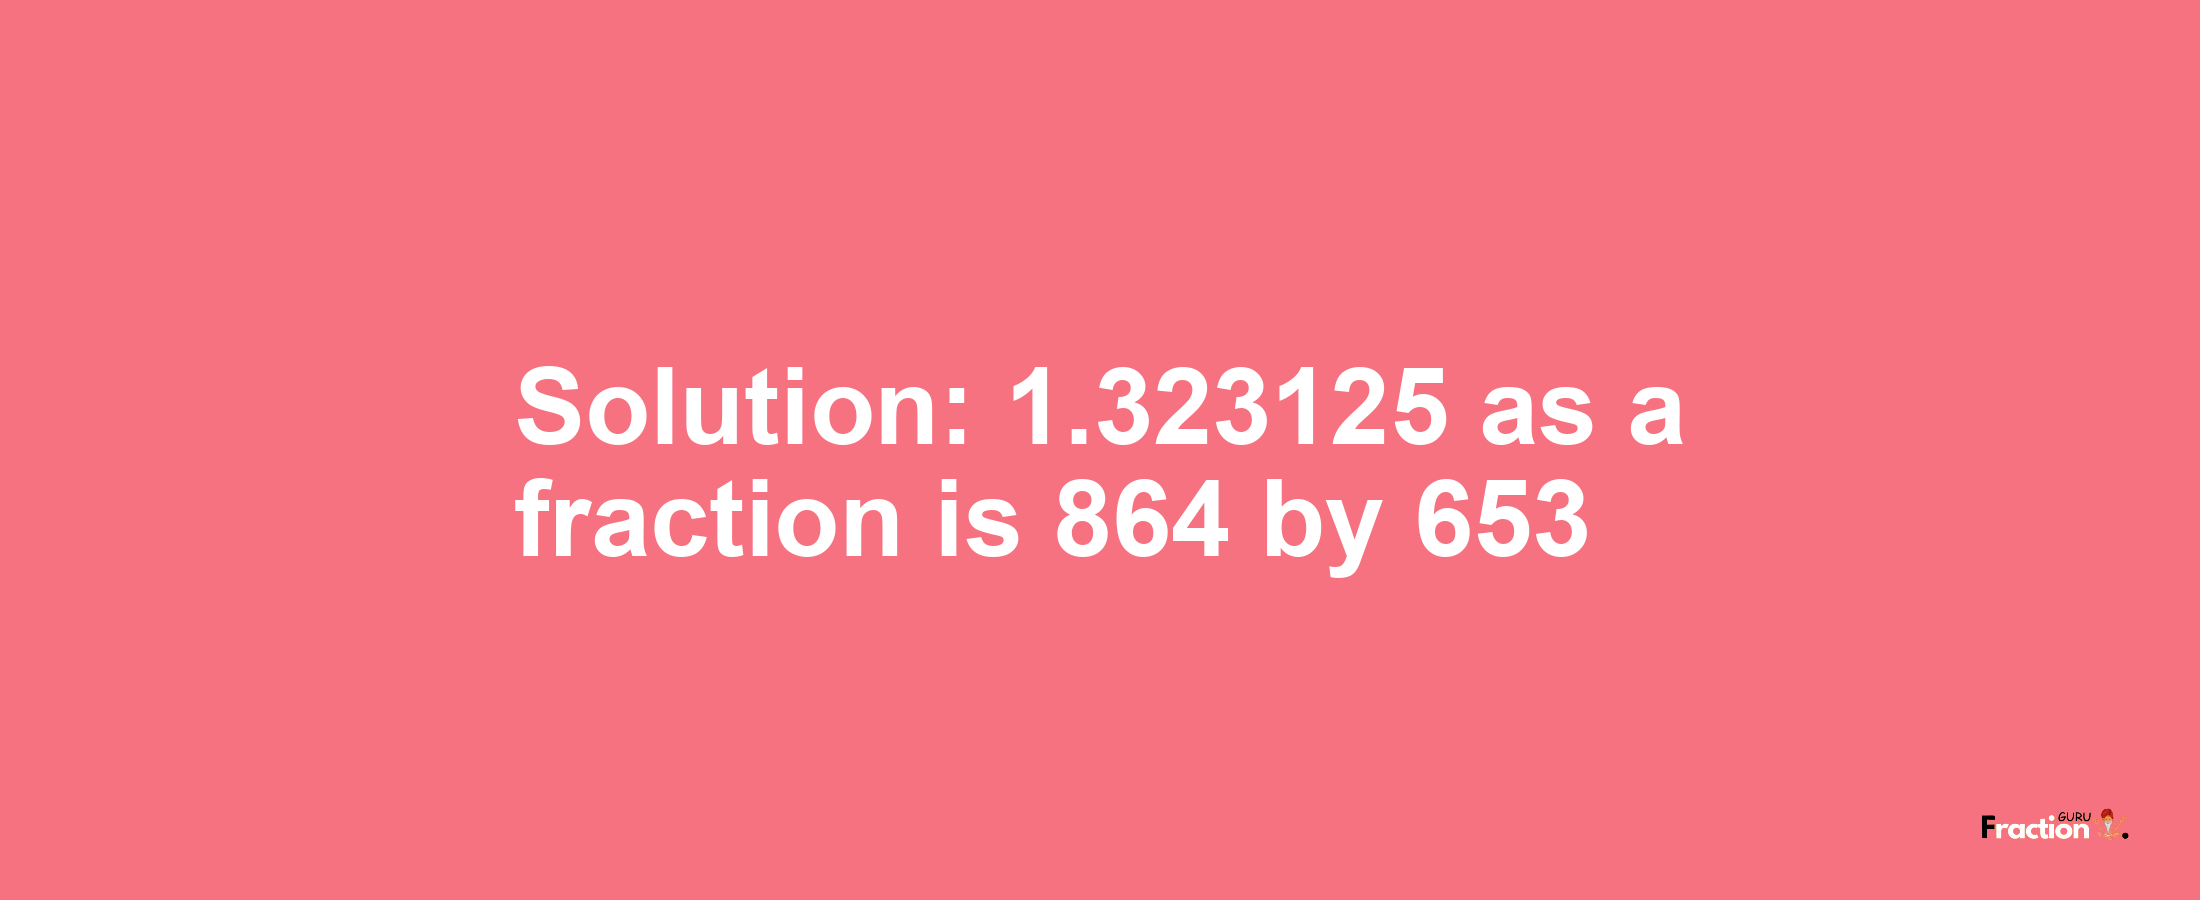 Solution:1.323125 as a fraction is 864/653